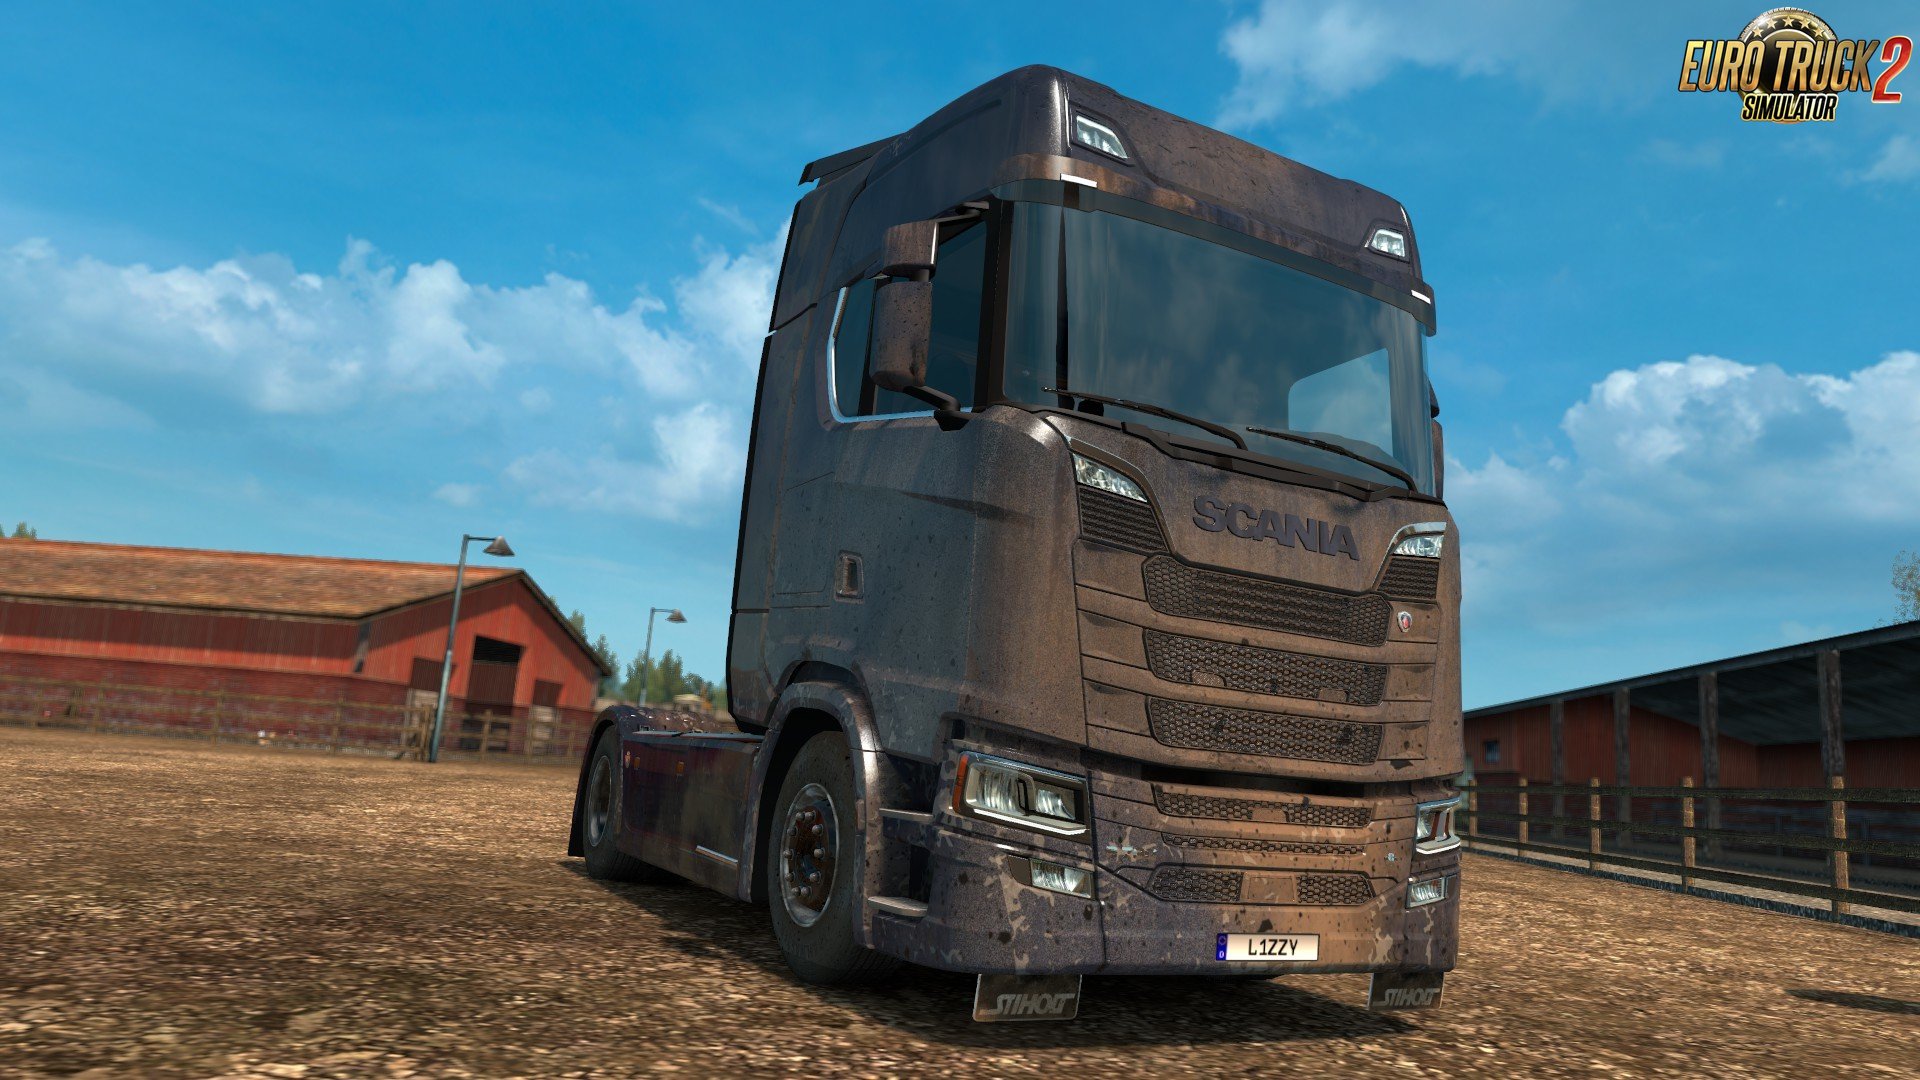 Dirty Scania S [version 1.0.2] by l1zzy